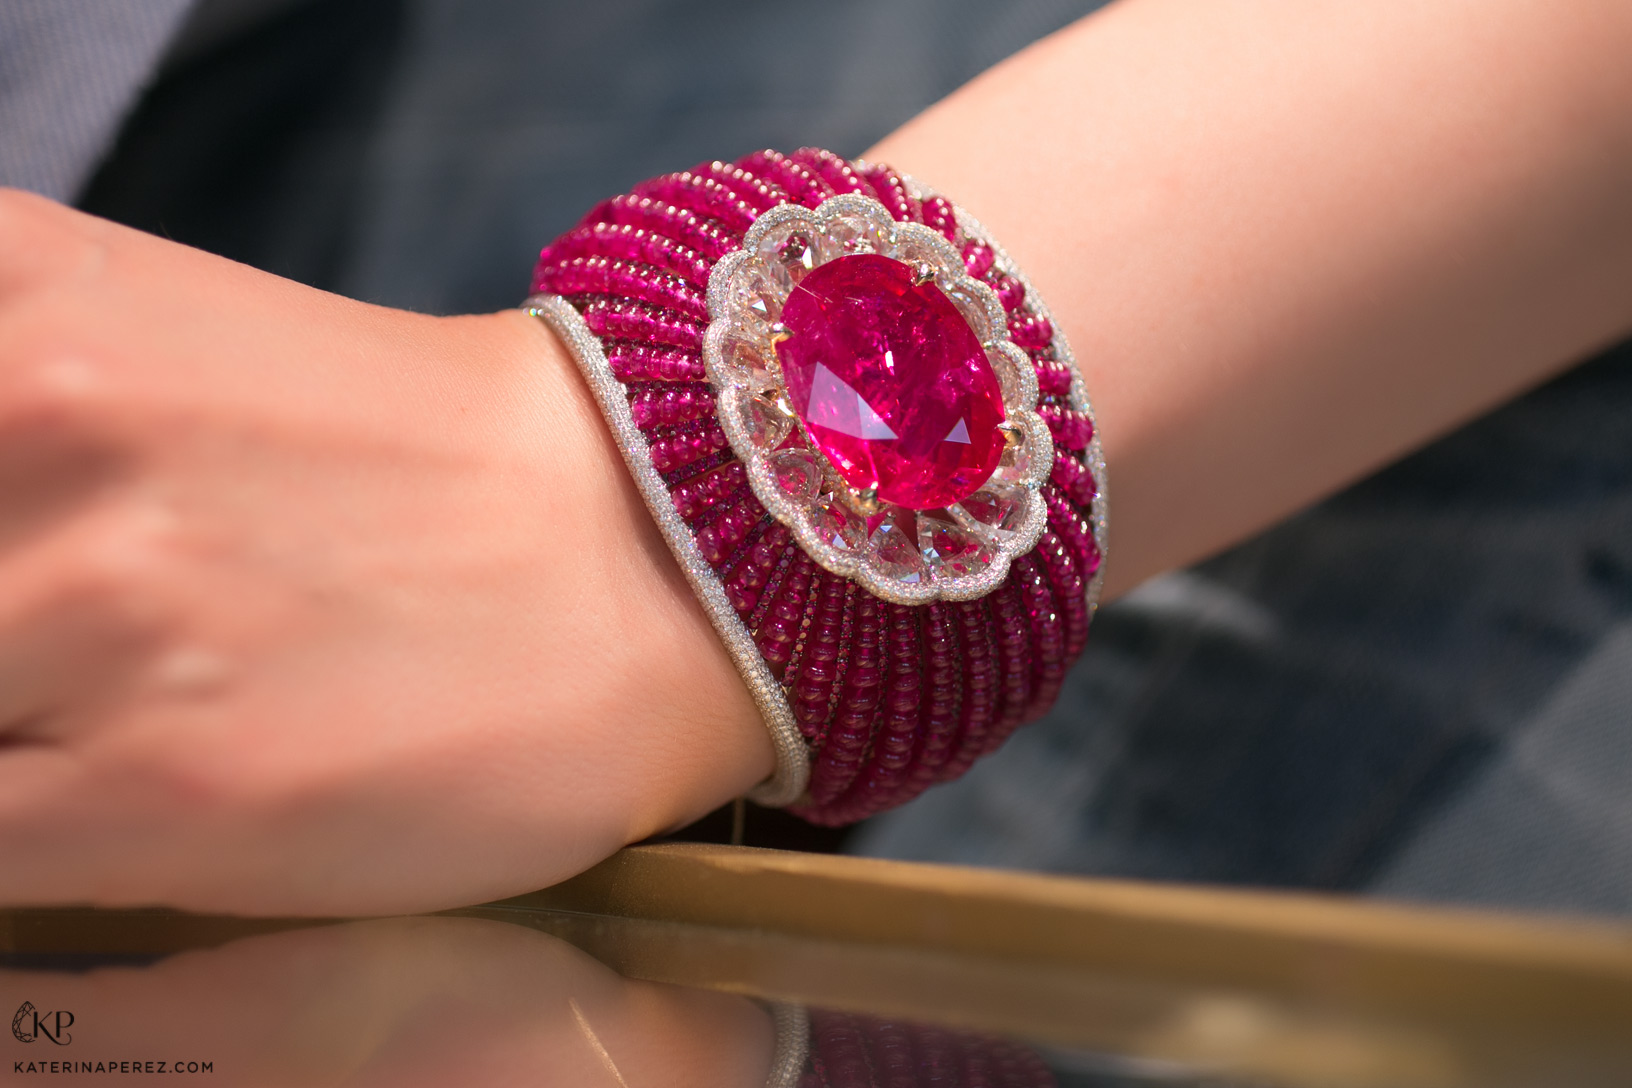 Chatila bracelet with 61.37 cts Burmese ruby, ruby beads and diamonds